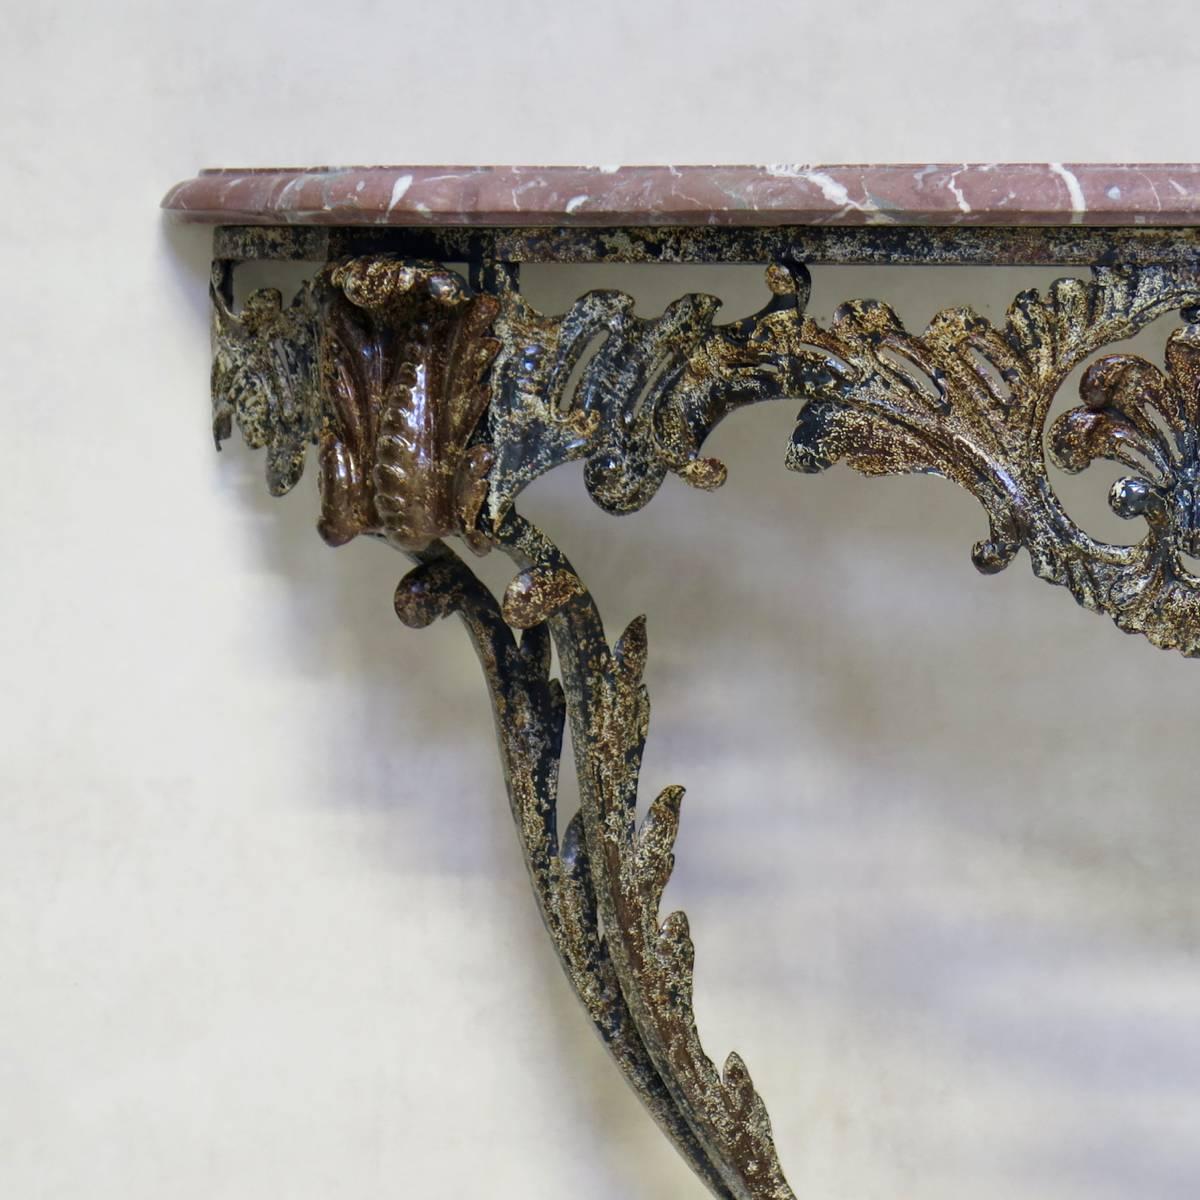 Lovely demilune console table with a forged iron base in the Rocaille style, decorated with acanthus leaves and shell motif. The iron has a gorgeous patina. Original pink marble top.